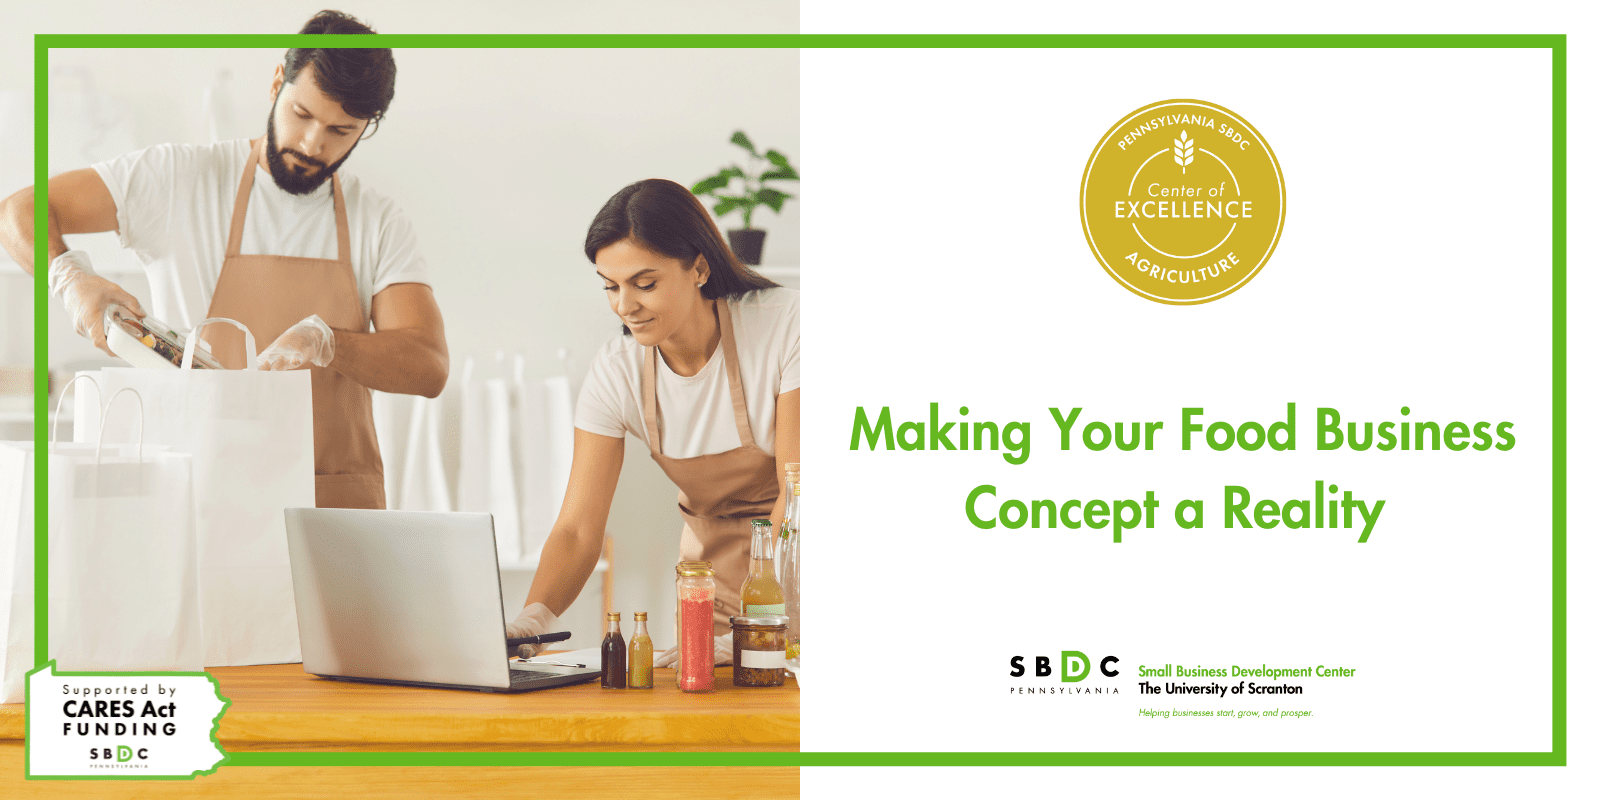 [SBDC-COE] Making Your Food Business Concept a Reality (Webinar)